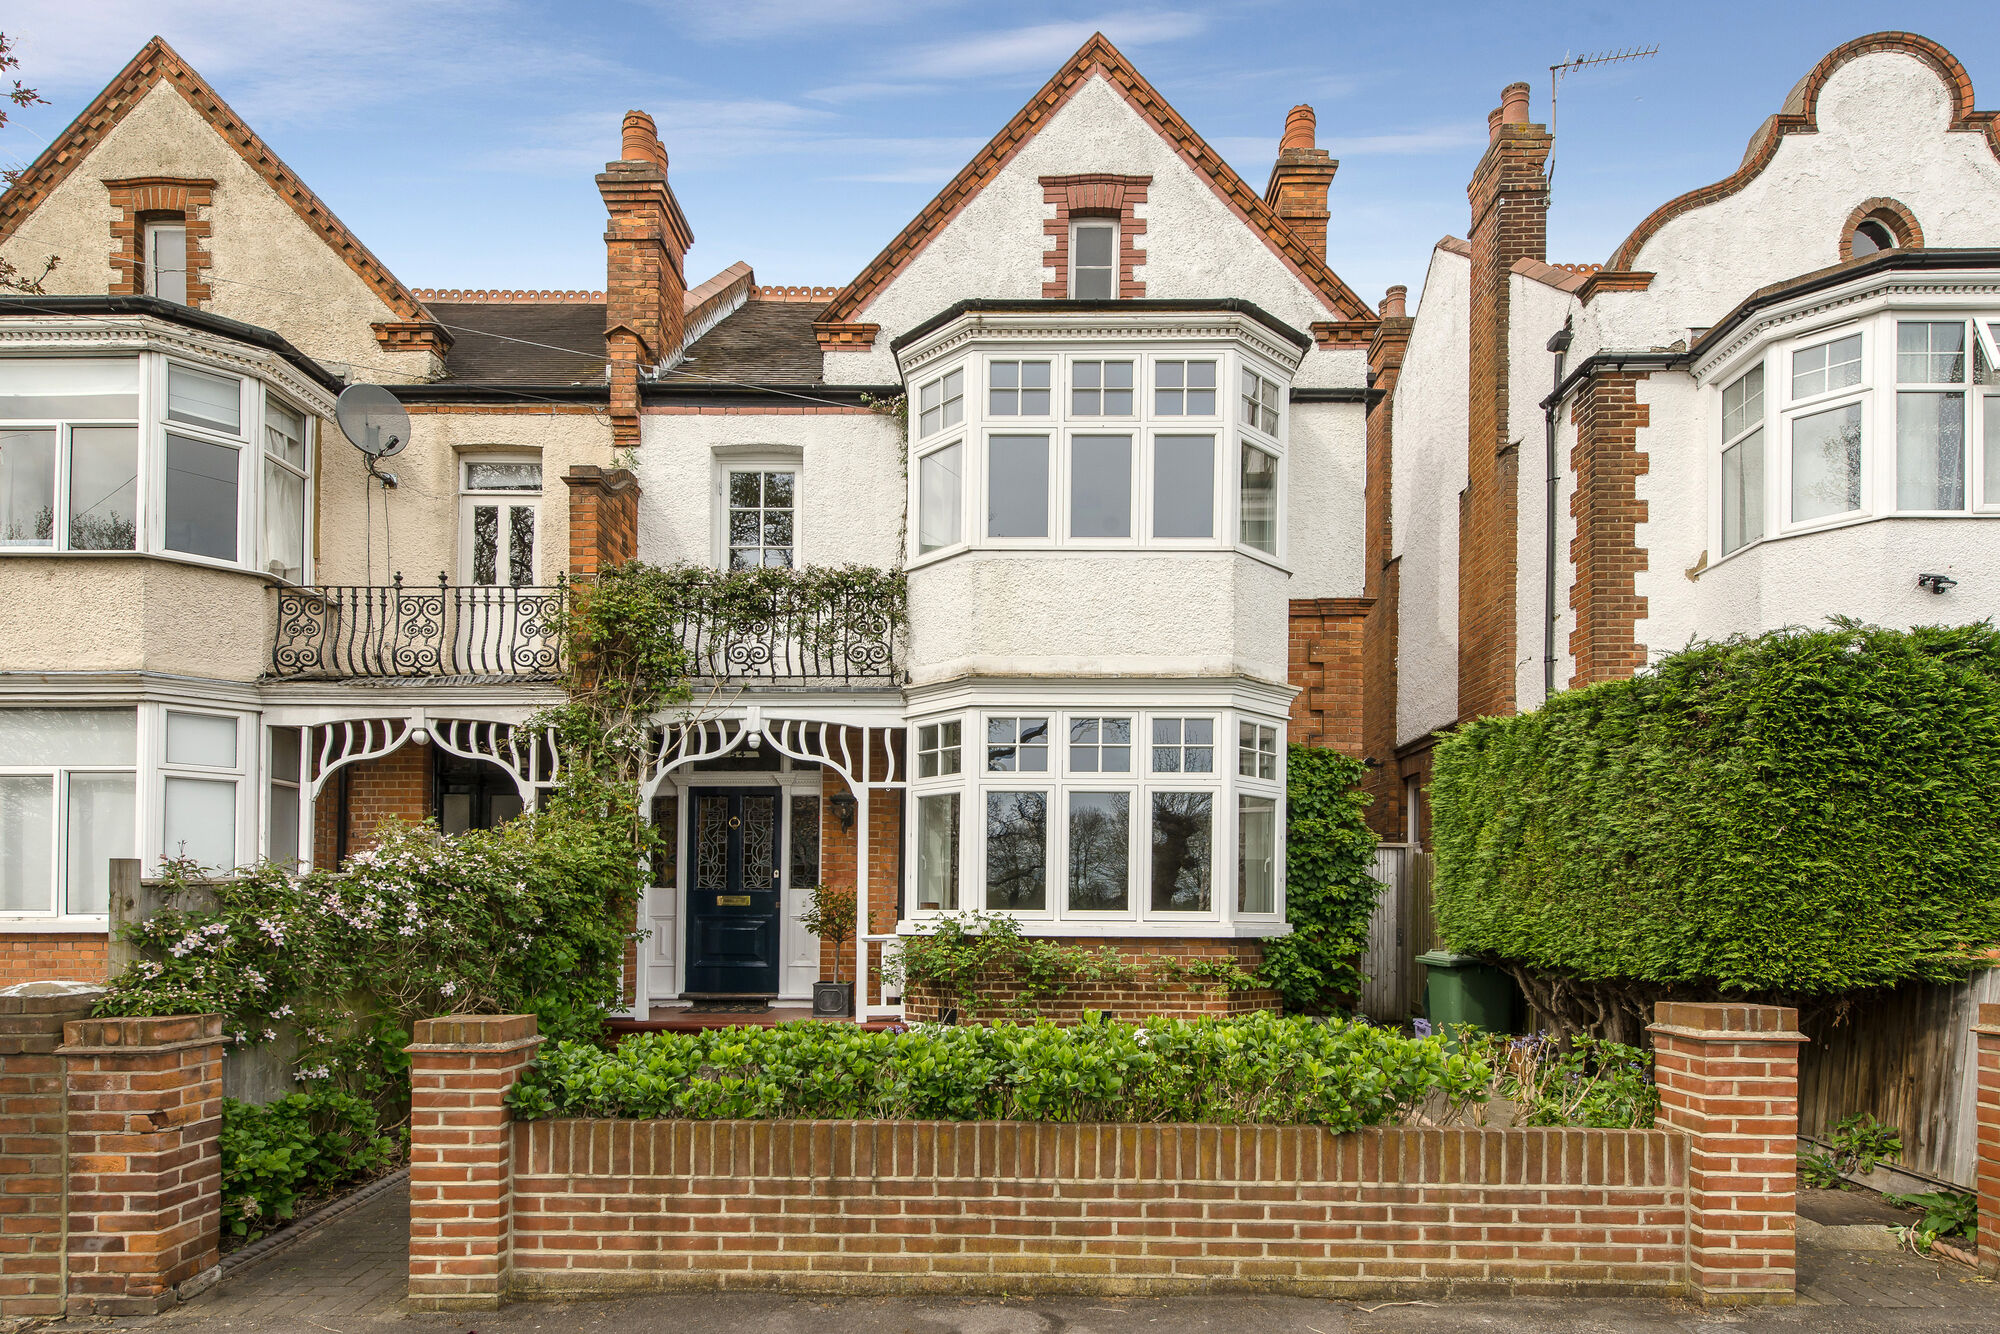 4 bedroom semi detached house for sale Melbury Gardens, London, SW20, main image